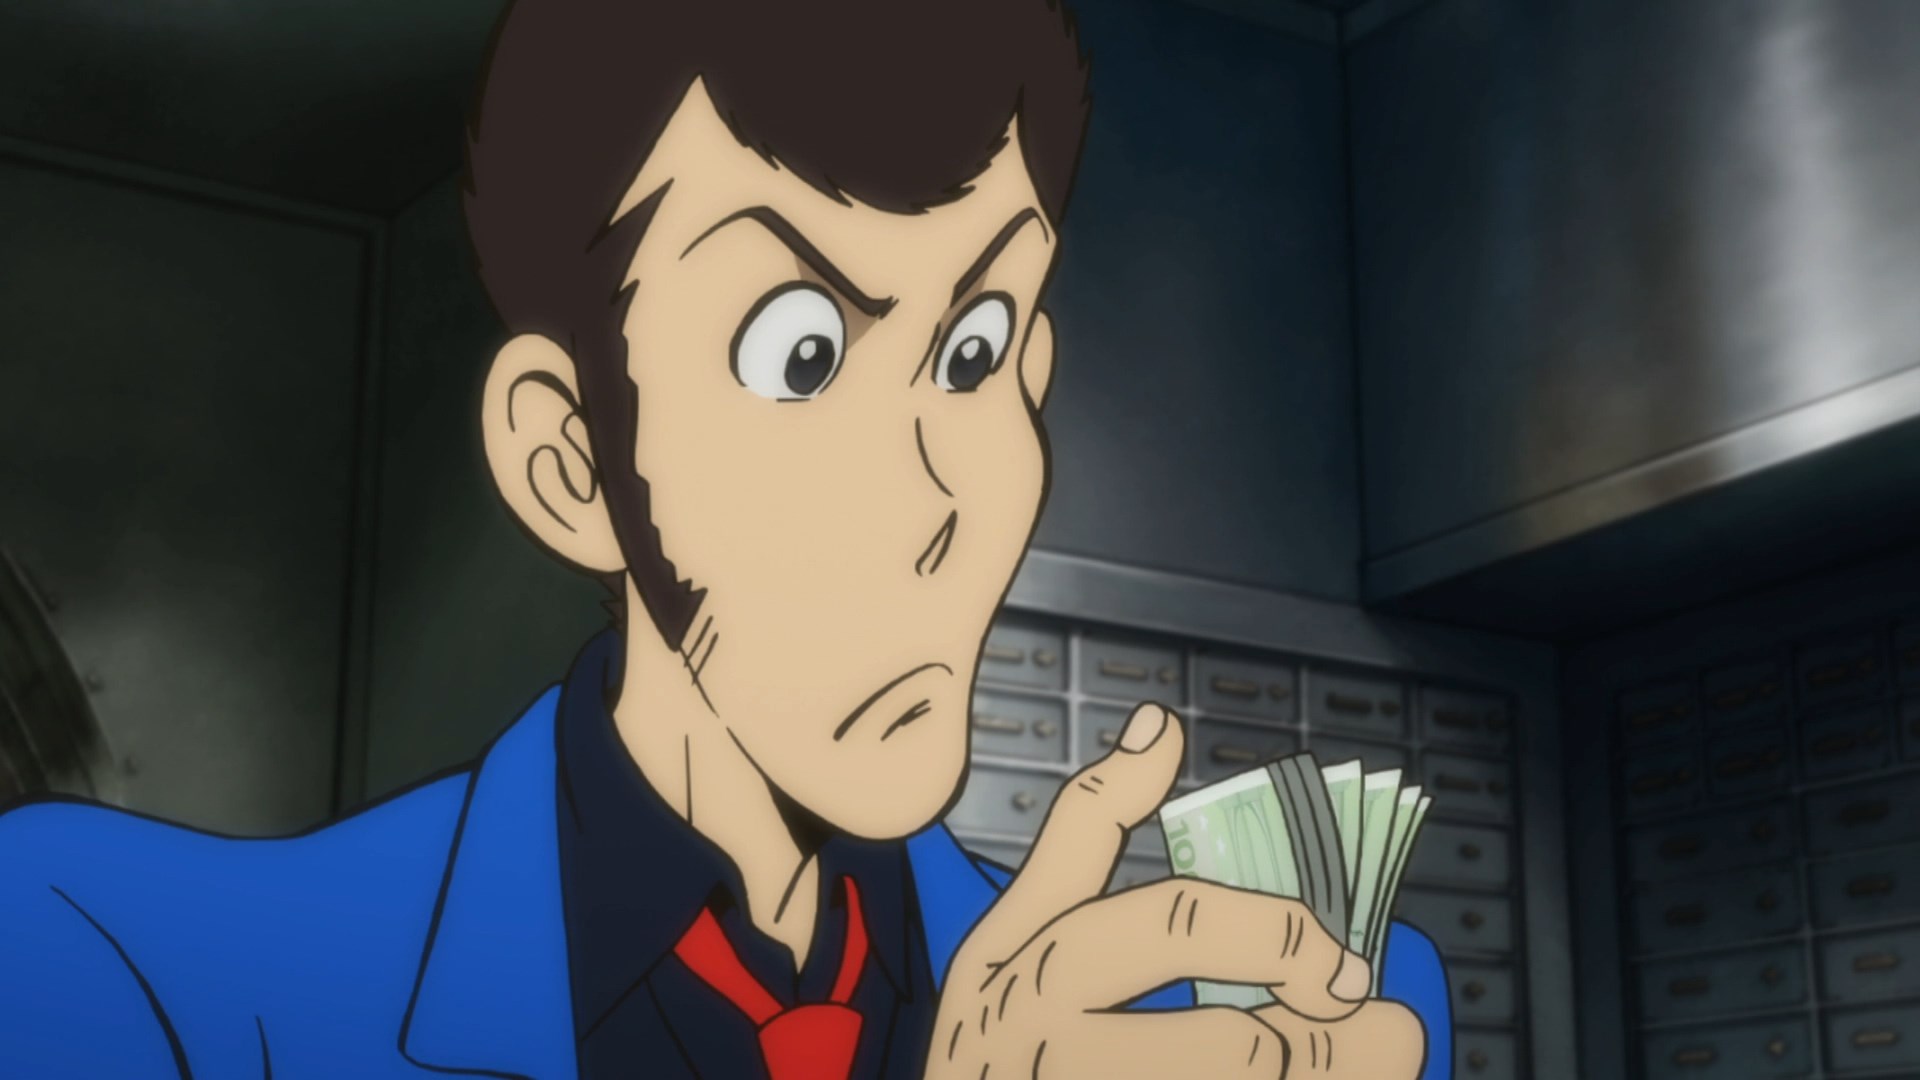 Lupin The Third #4